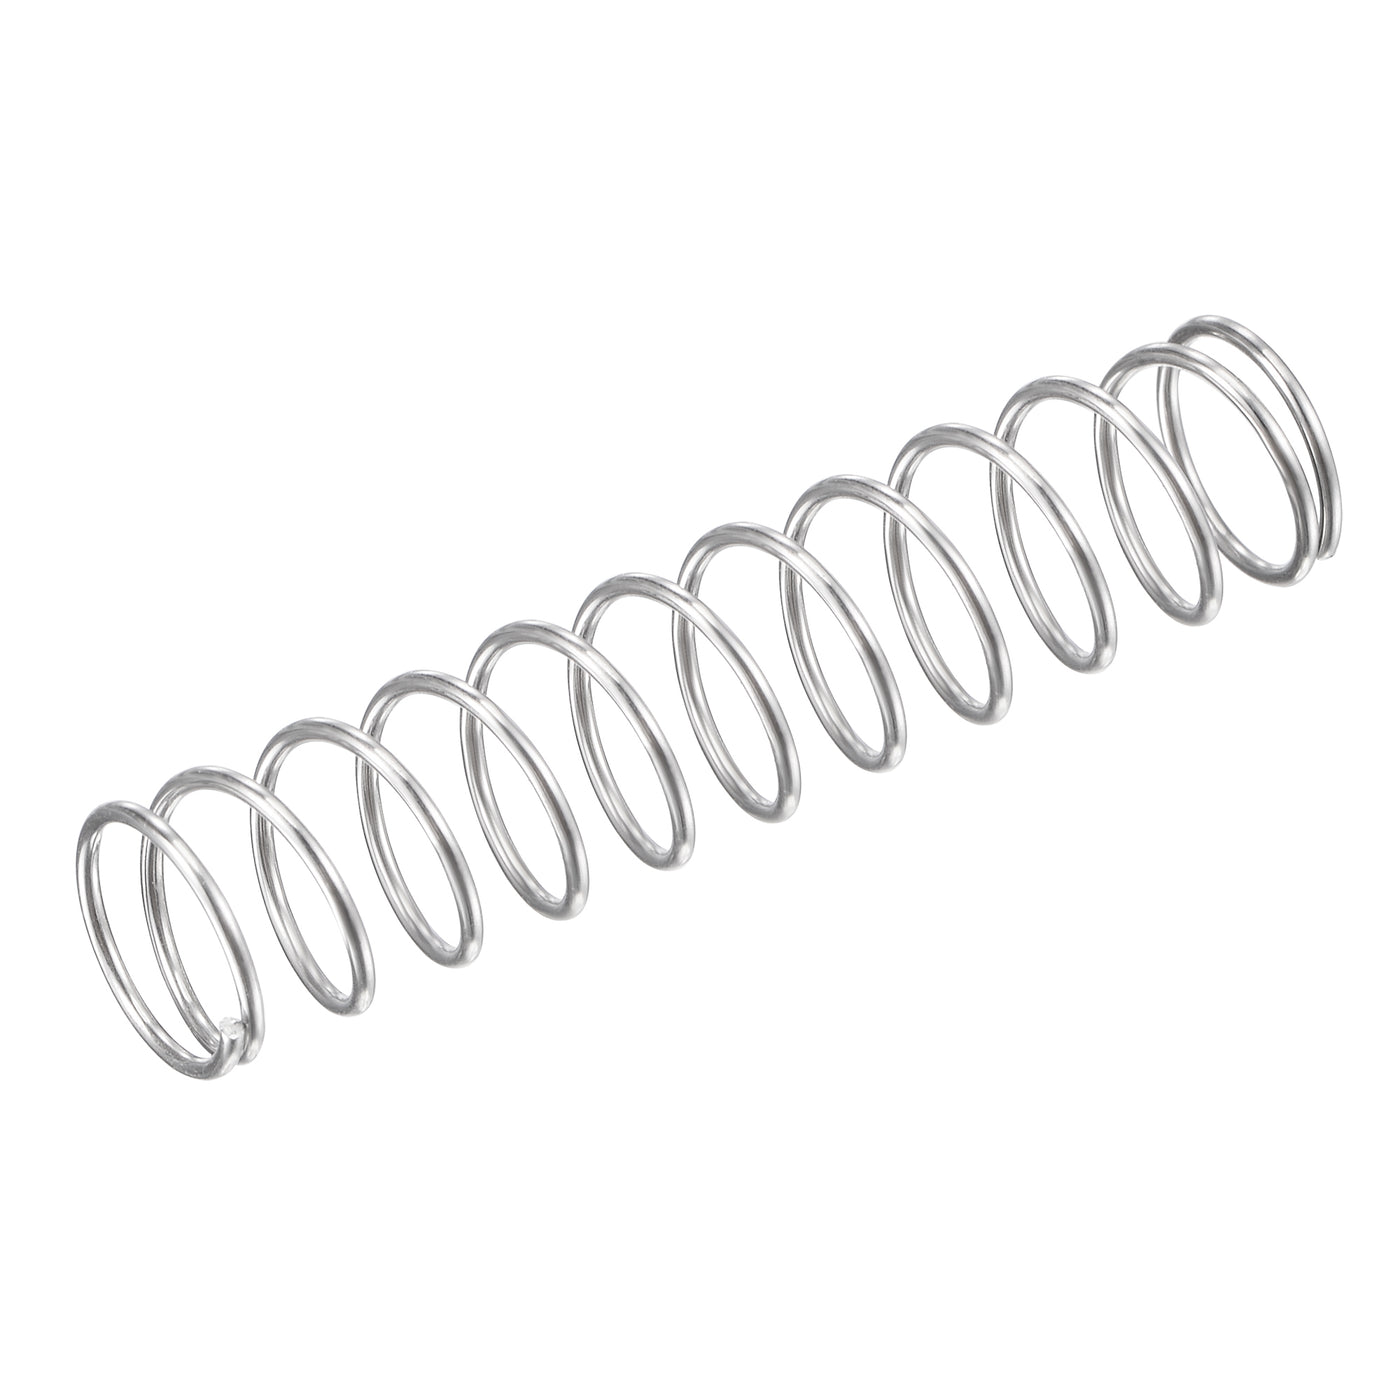 uxcell Uxcell 11mmx0.9mmx50mm 304 Stainless Steel Compression Spring 11N Load Capacity 20pcs